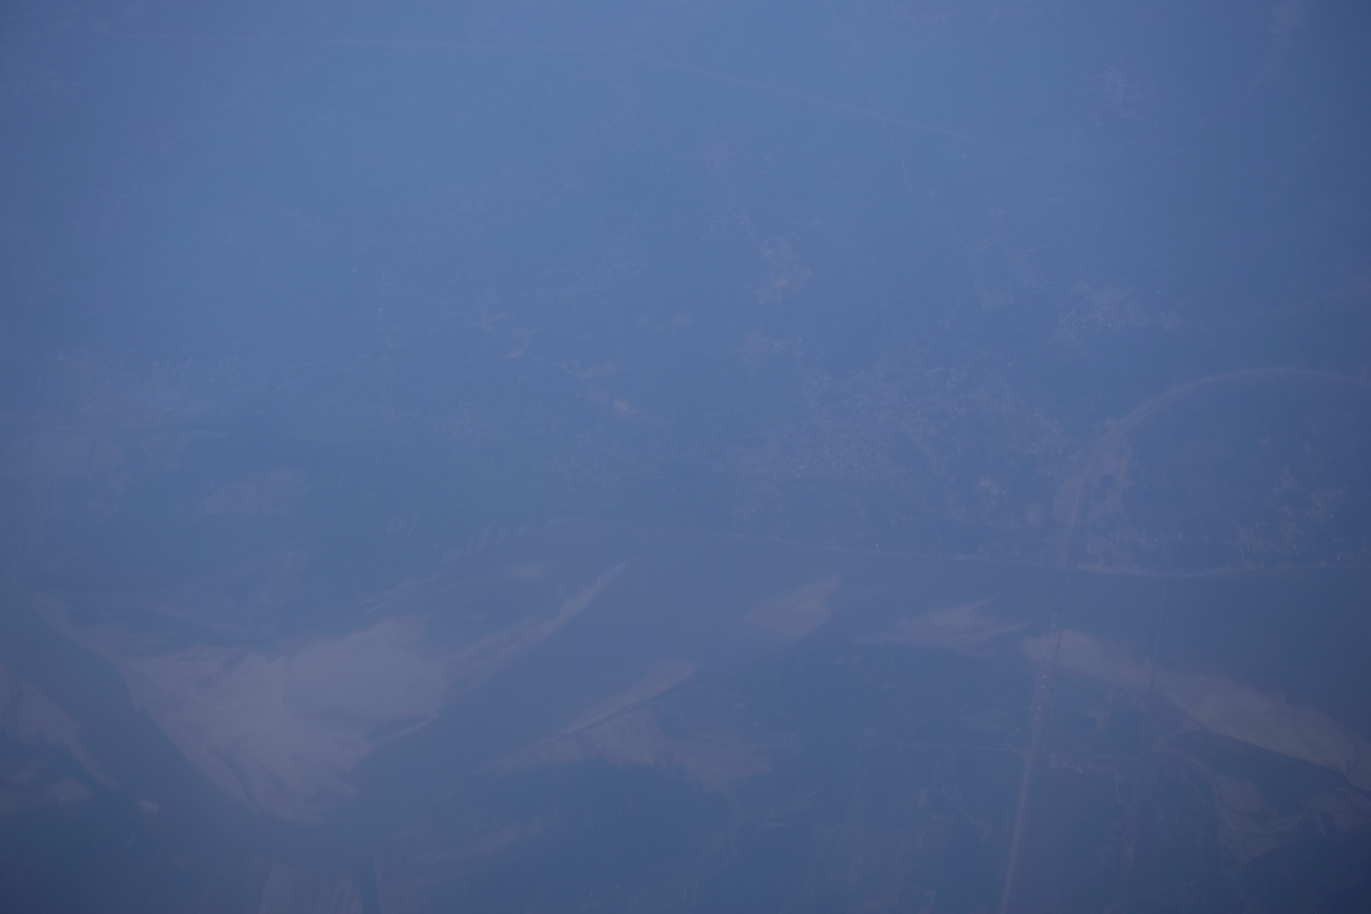 Ganges river seen from the cruising altitude, Emirates DXB-MNL flight